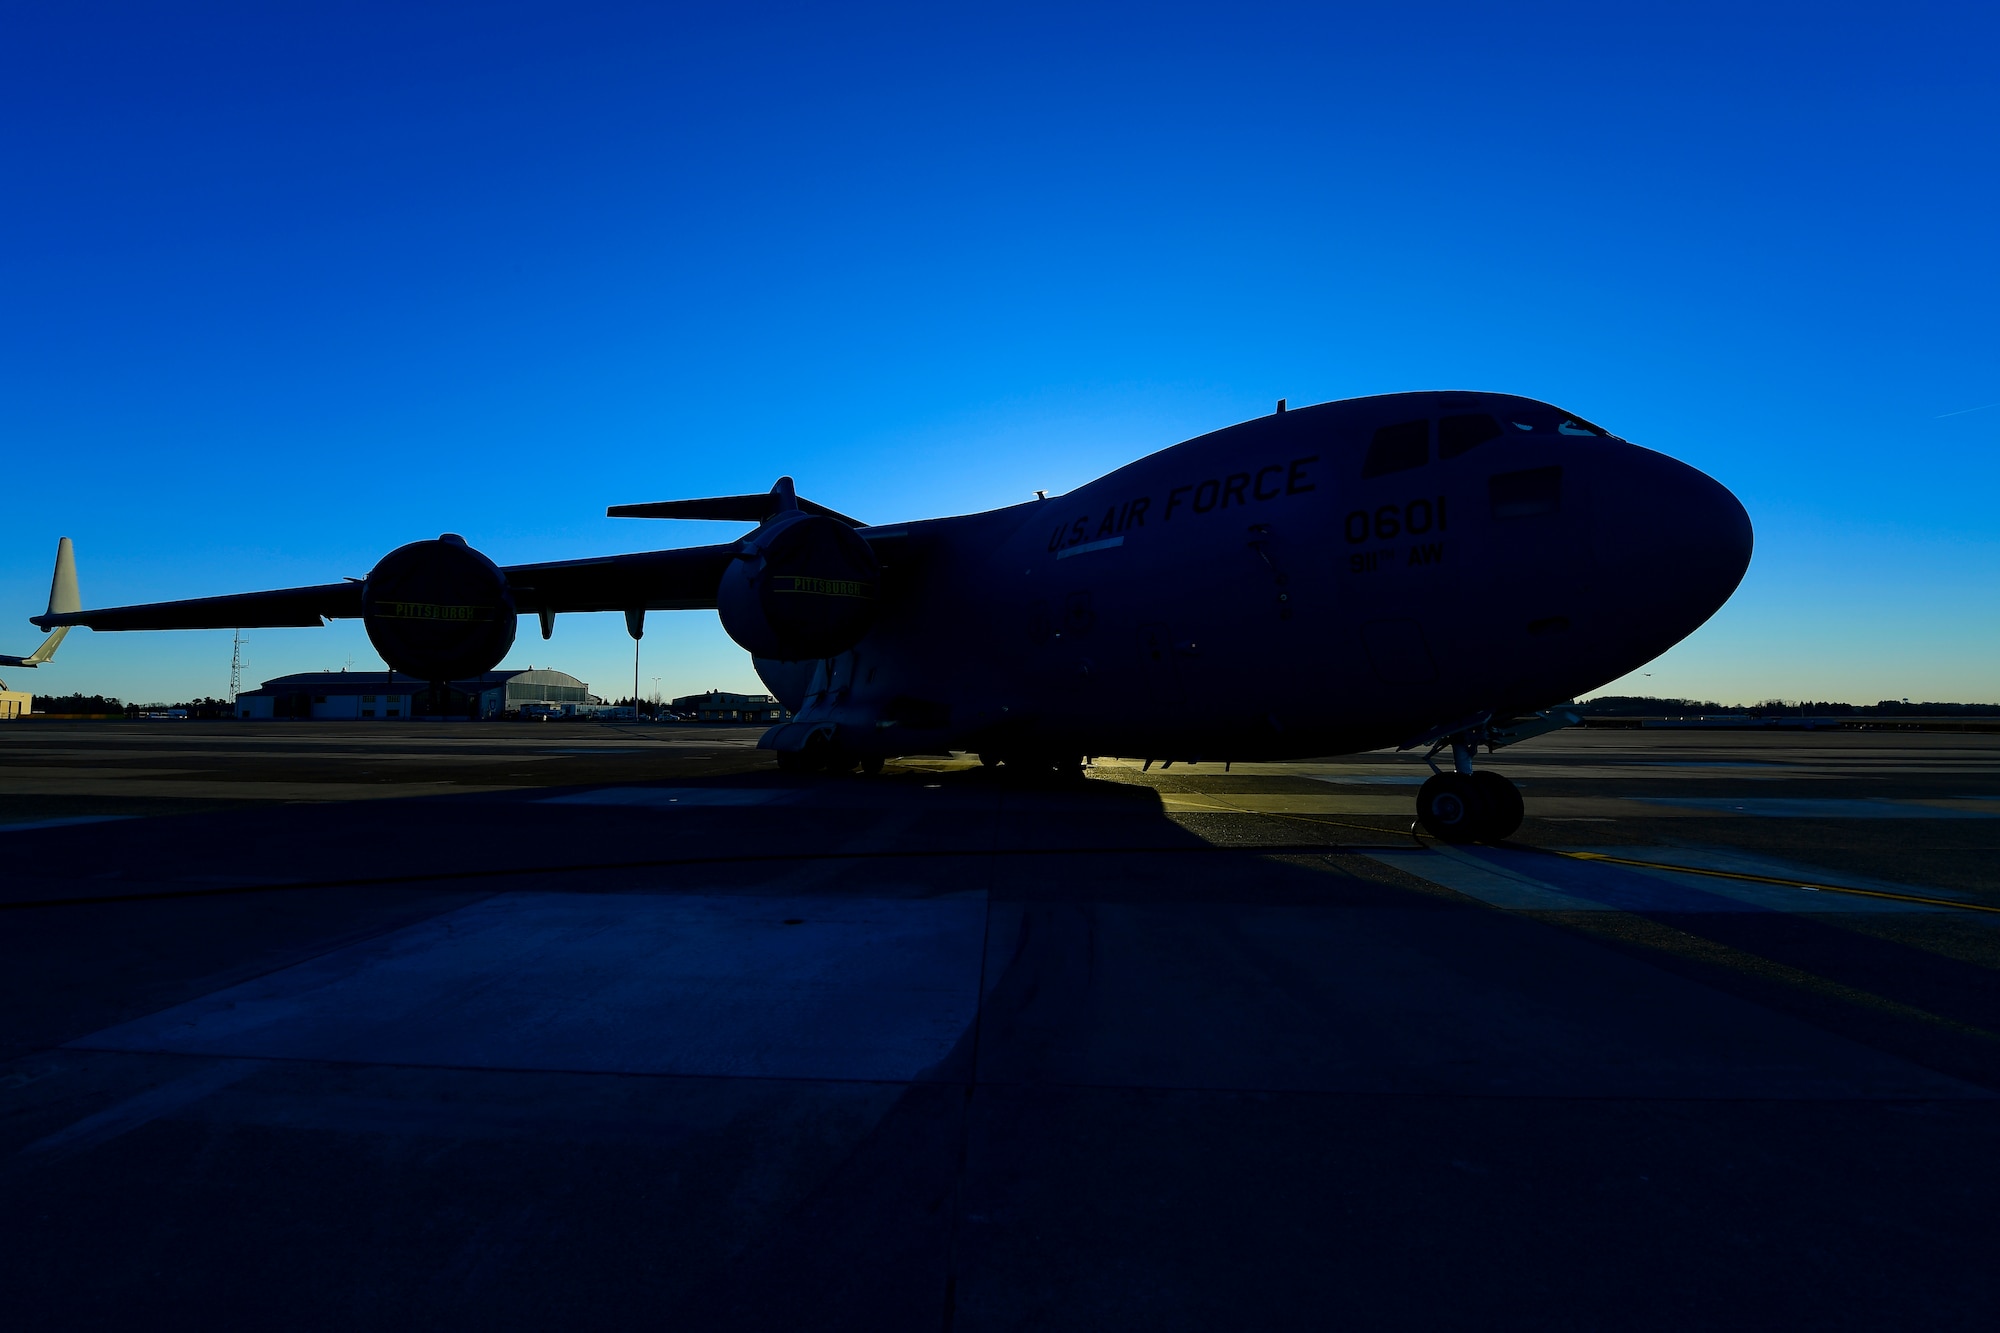 A C-17 Globemaster III assigned to the 911th Airlift Wing sits on the flightline at the Pittsburgh International Airport Air Reserve Station, Pennsylvania, March 26, 2019. The C-17 is capable of rapid strategic delivery of troops and all types of cargo to main operating bases or directly to forward bases in the deployment area.